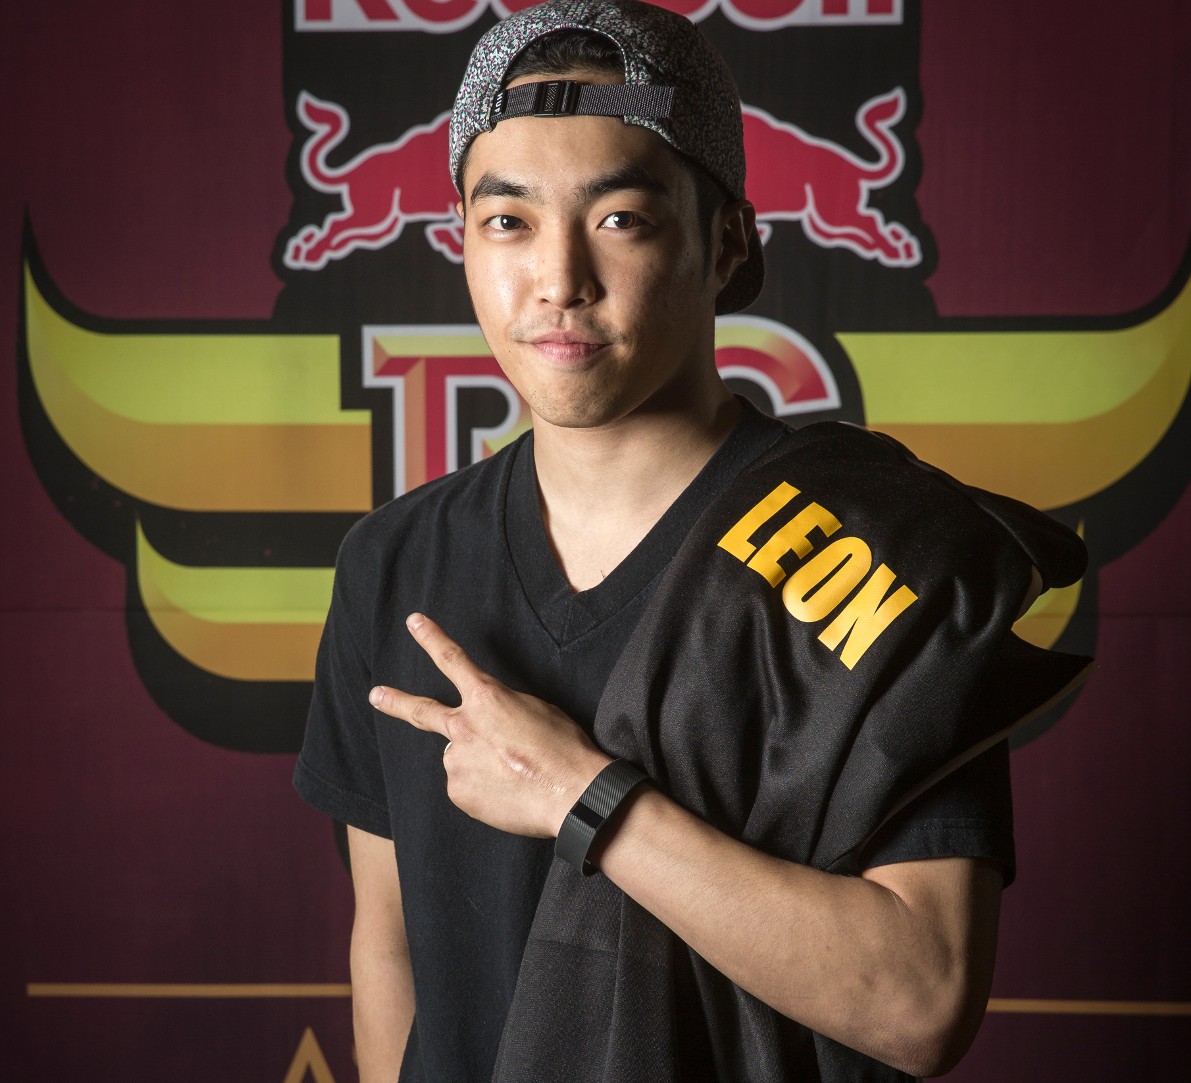 Leon poses for a portrait at Red bull Bc One AP Media day in Seoul, Korea on October 16th, 2015